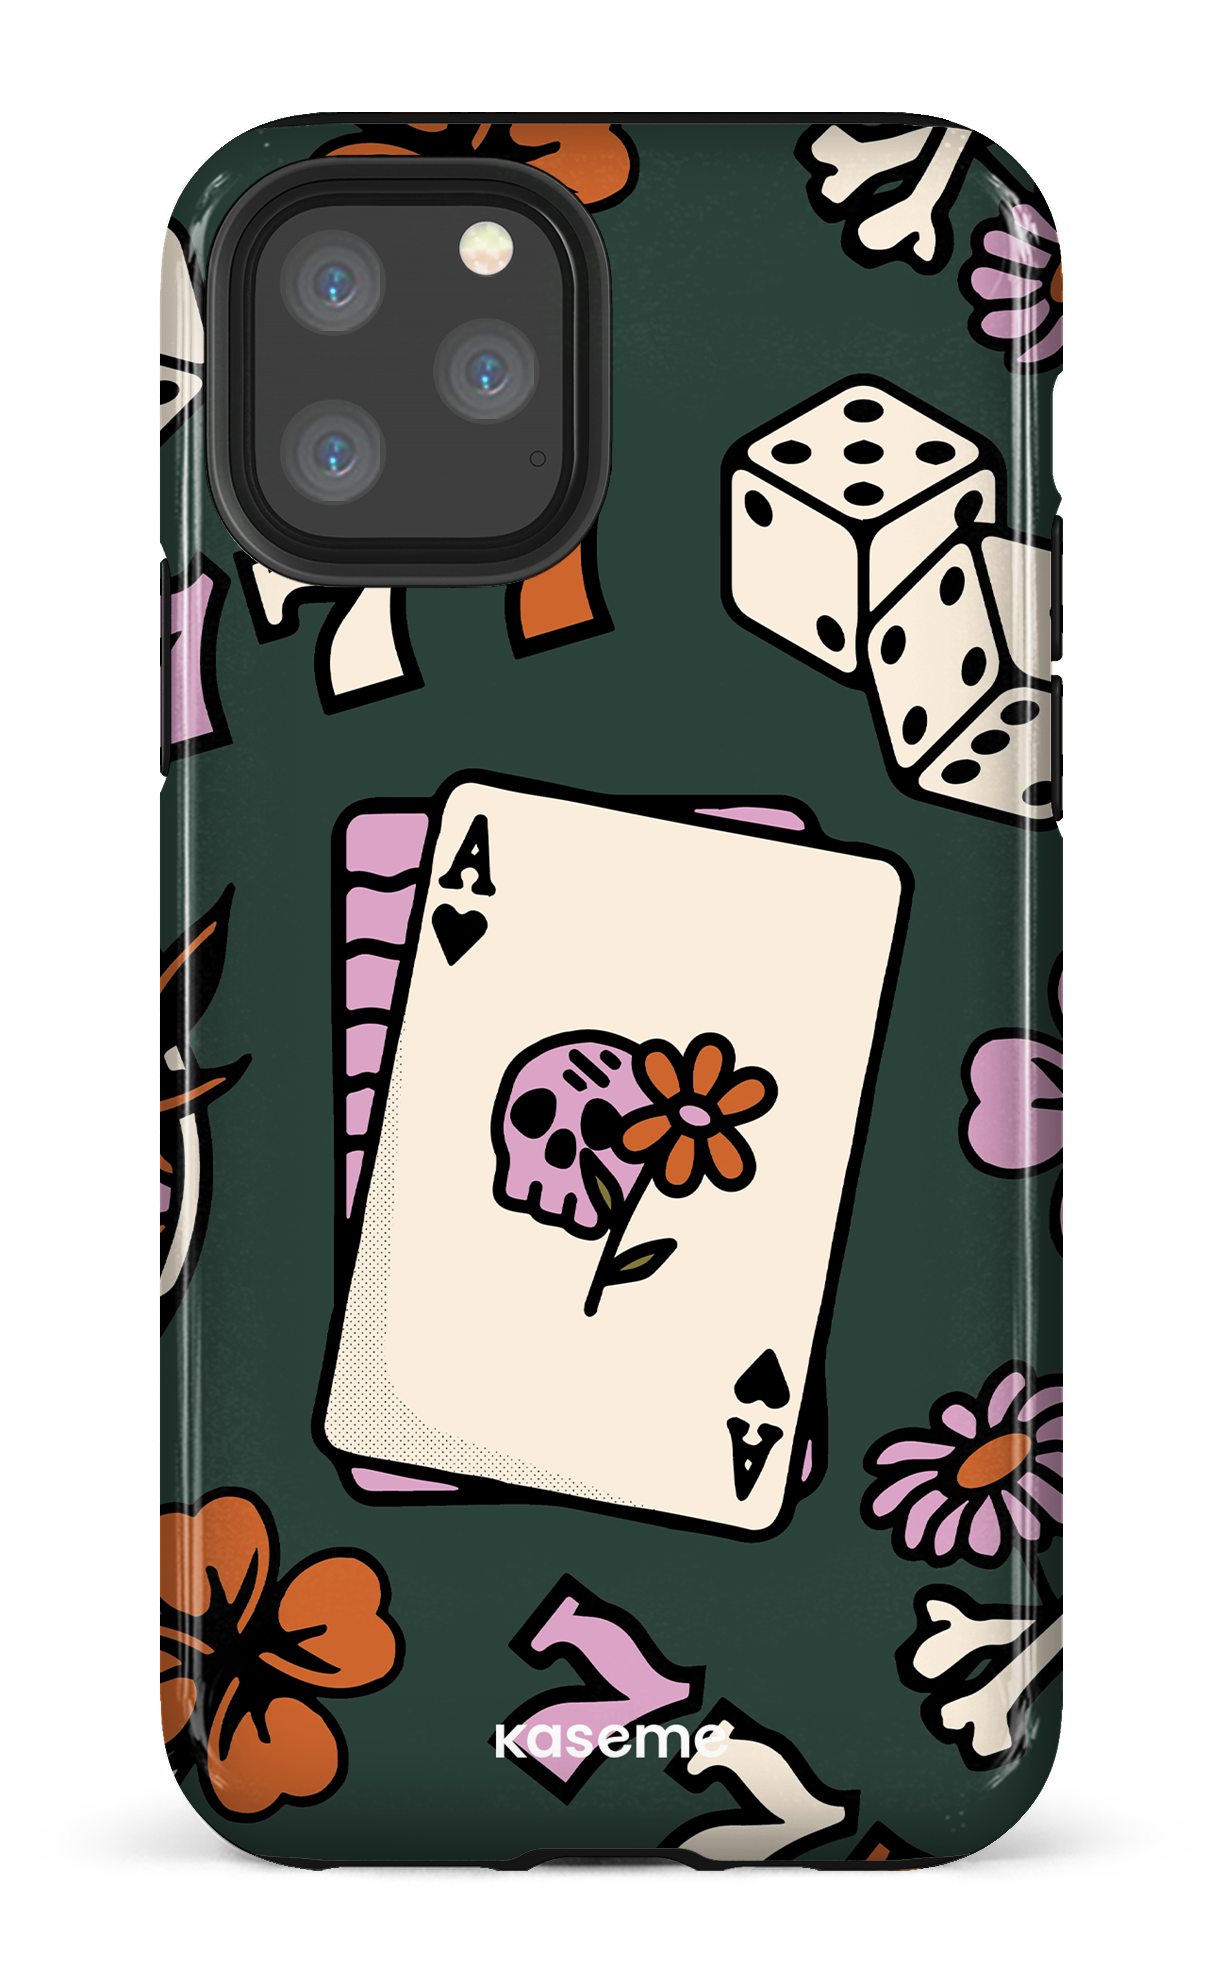 Poker Face - iPhone 11 Pro